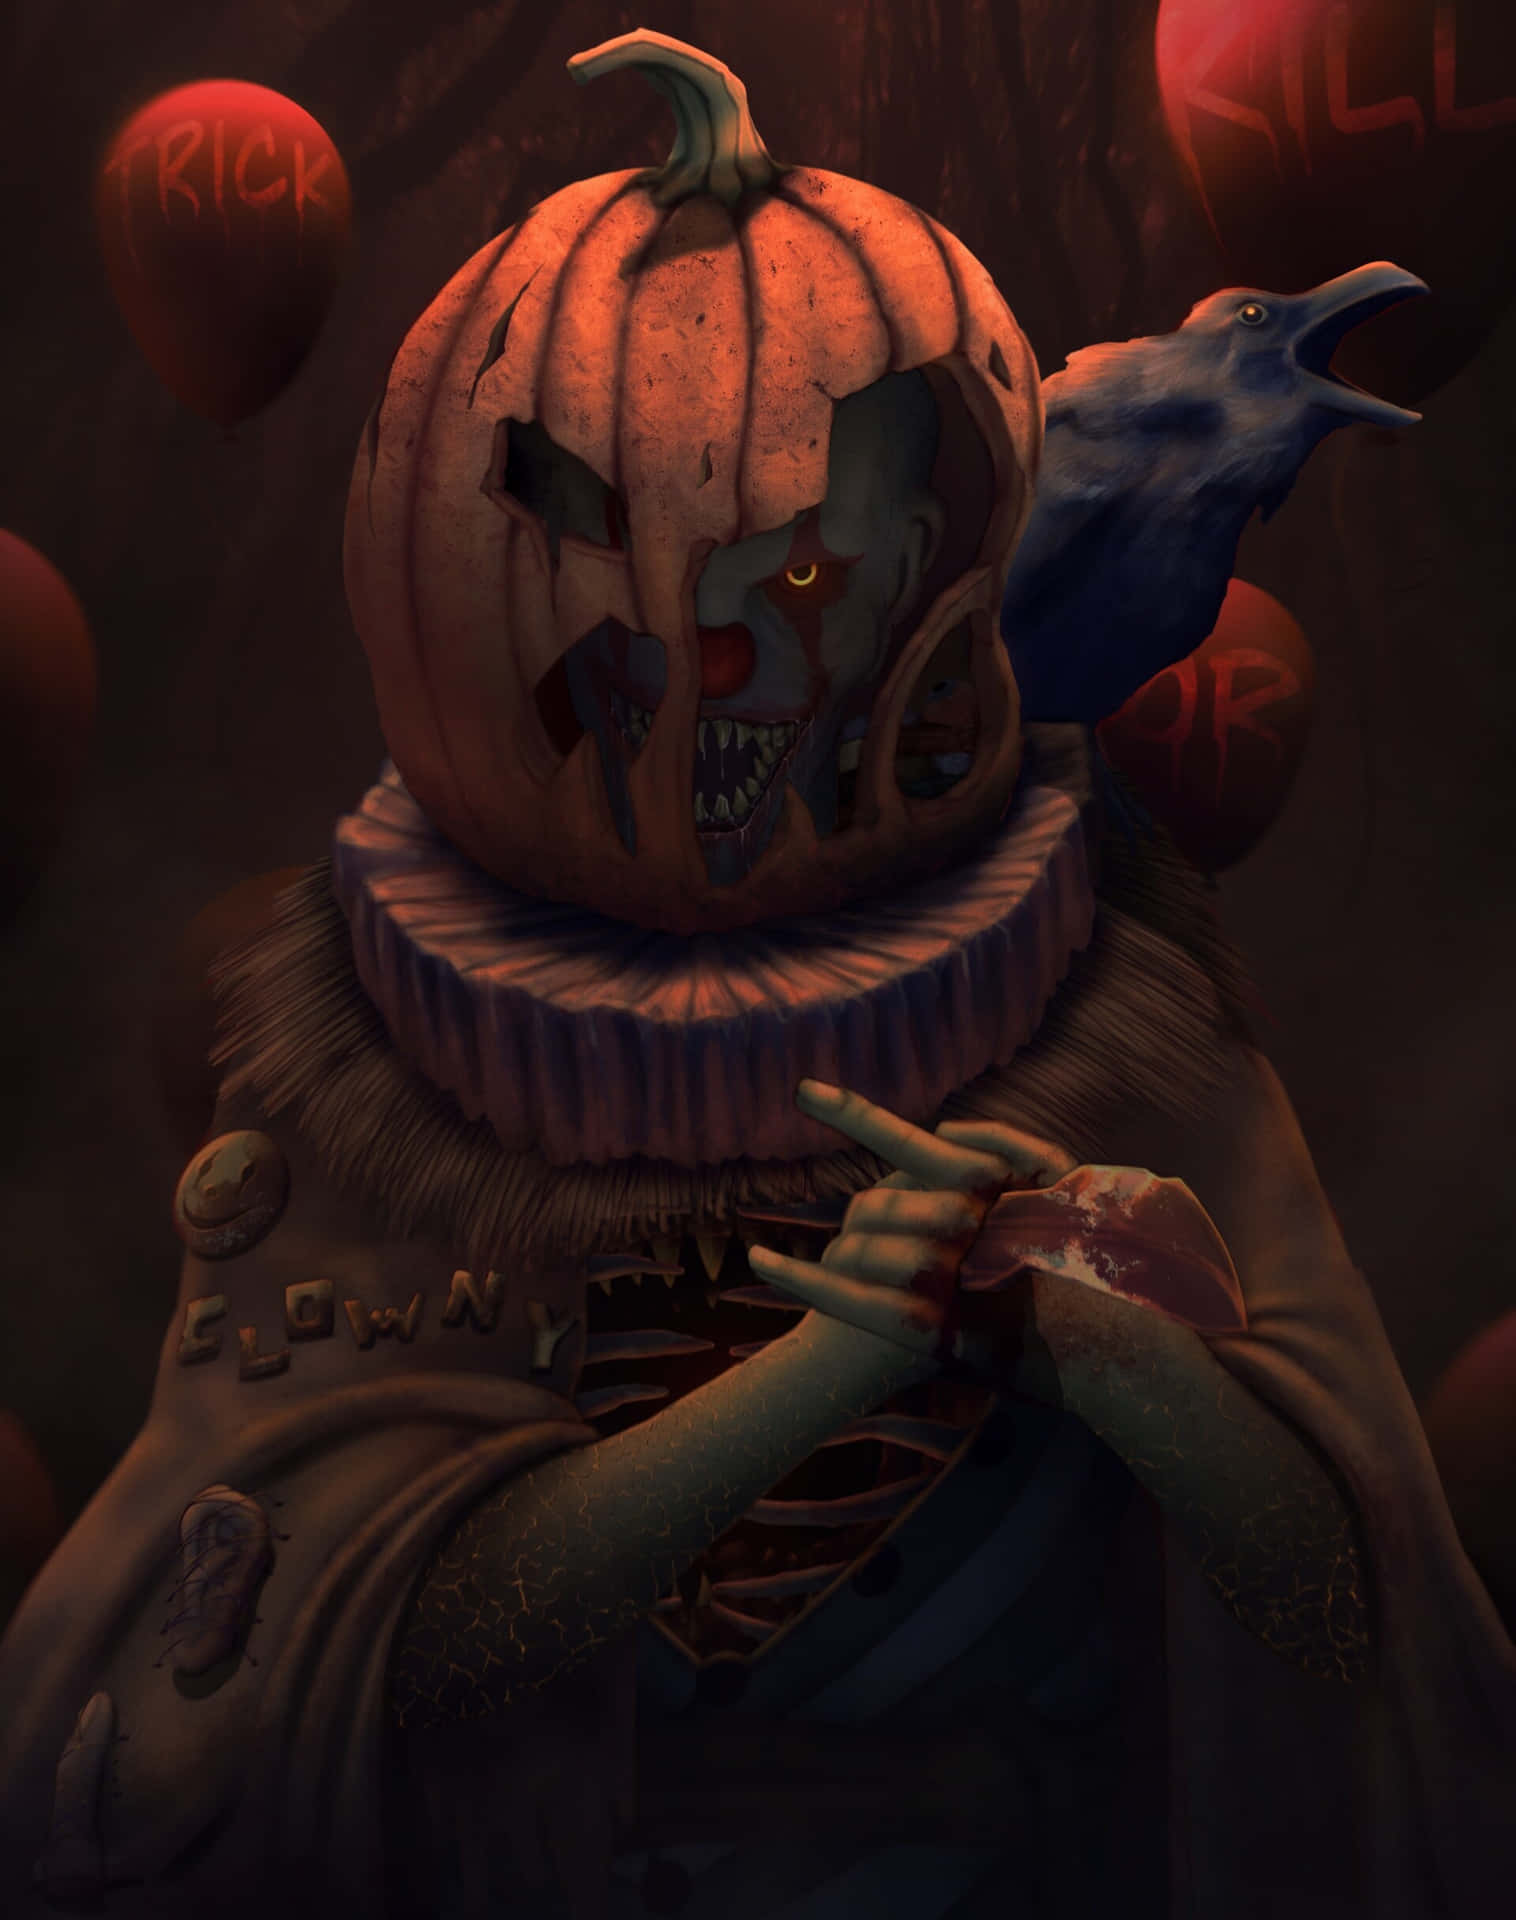 Killer Clown With Gawky Crow Wallpaper